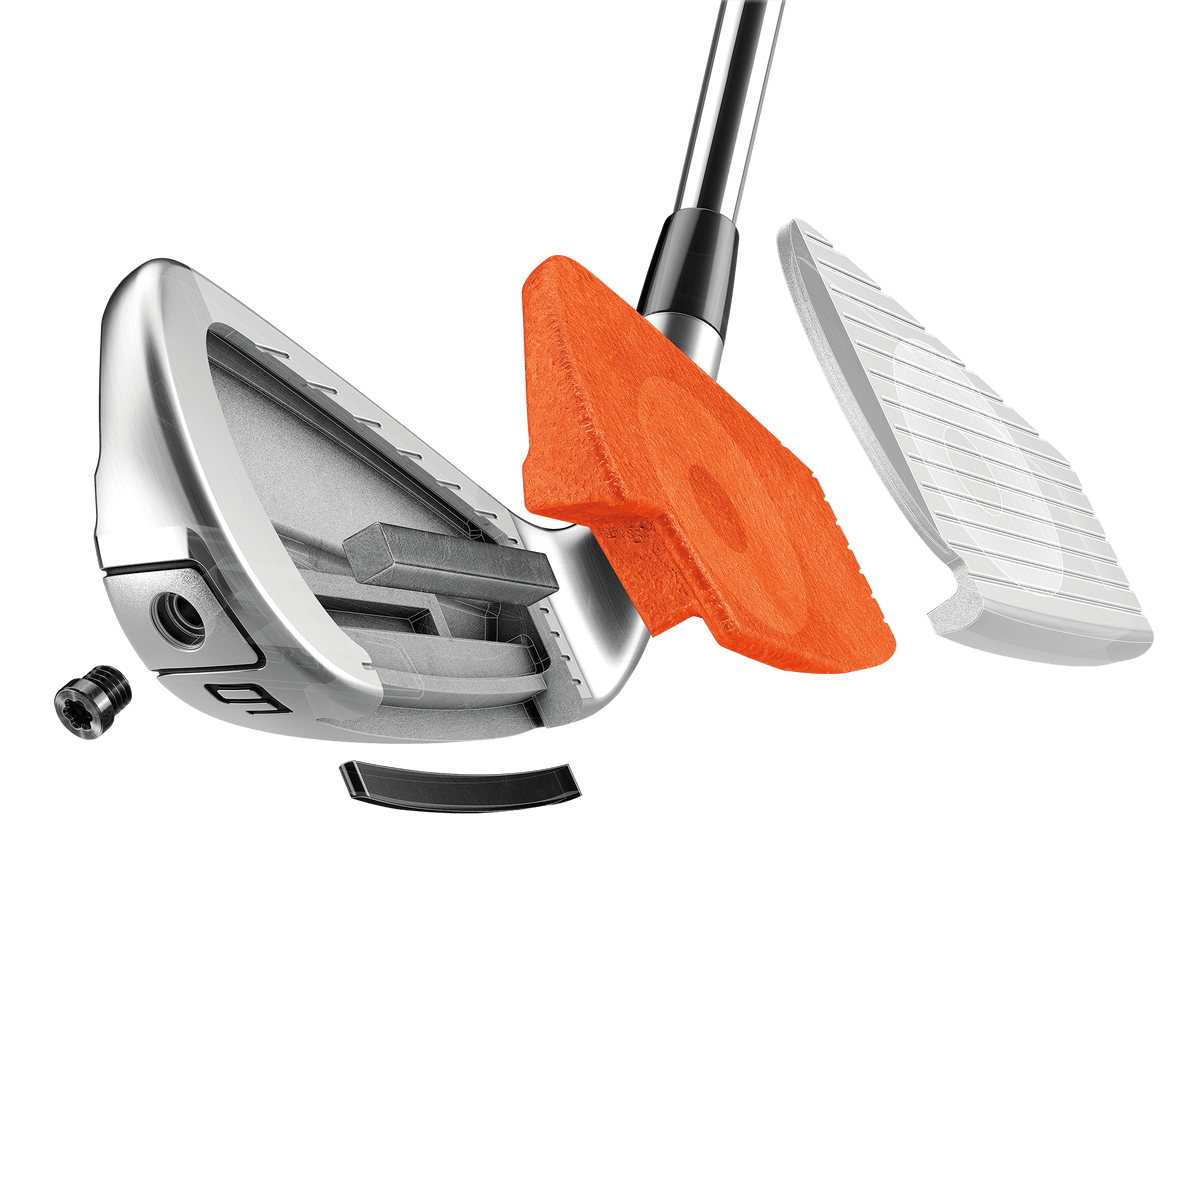 TaylorMade P790 Irons 2019 · Right handed · Steel · Stiff · 4-PW